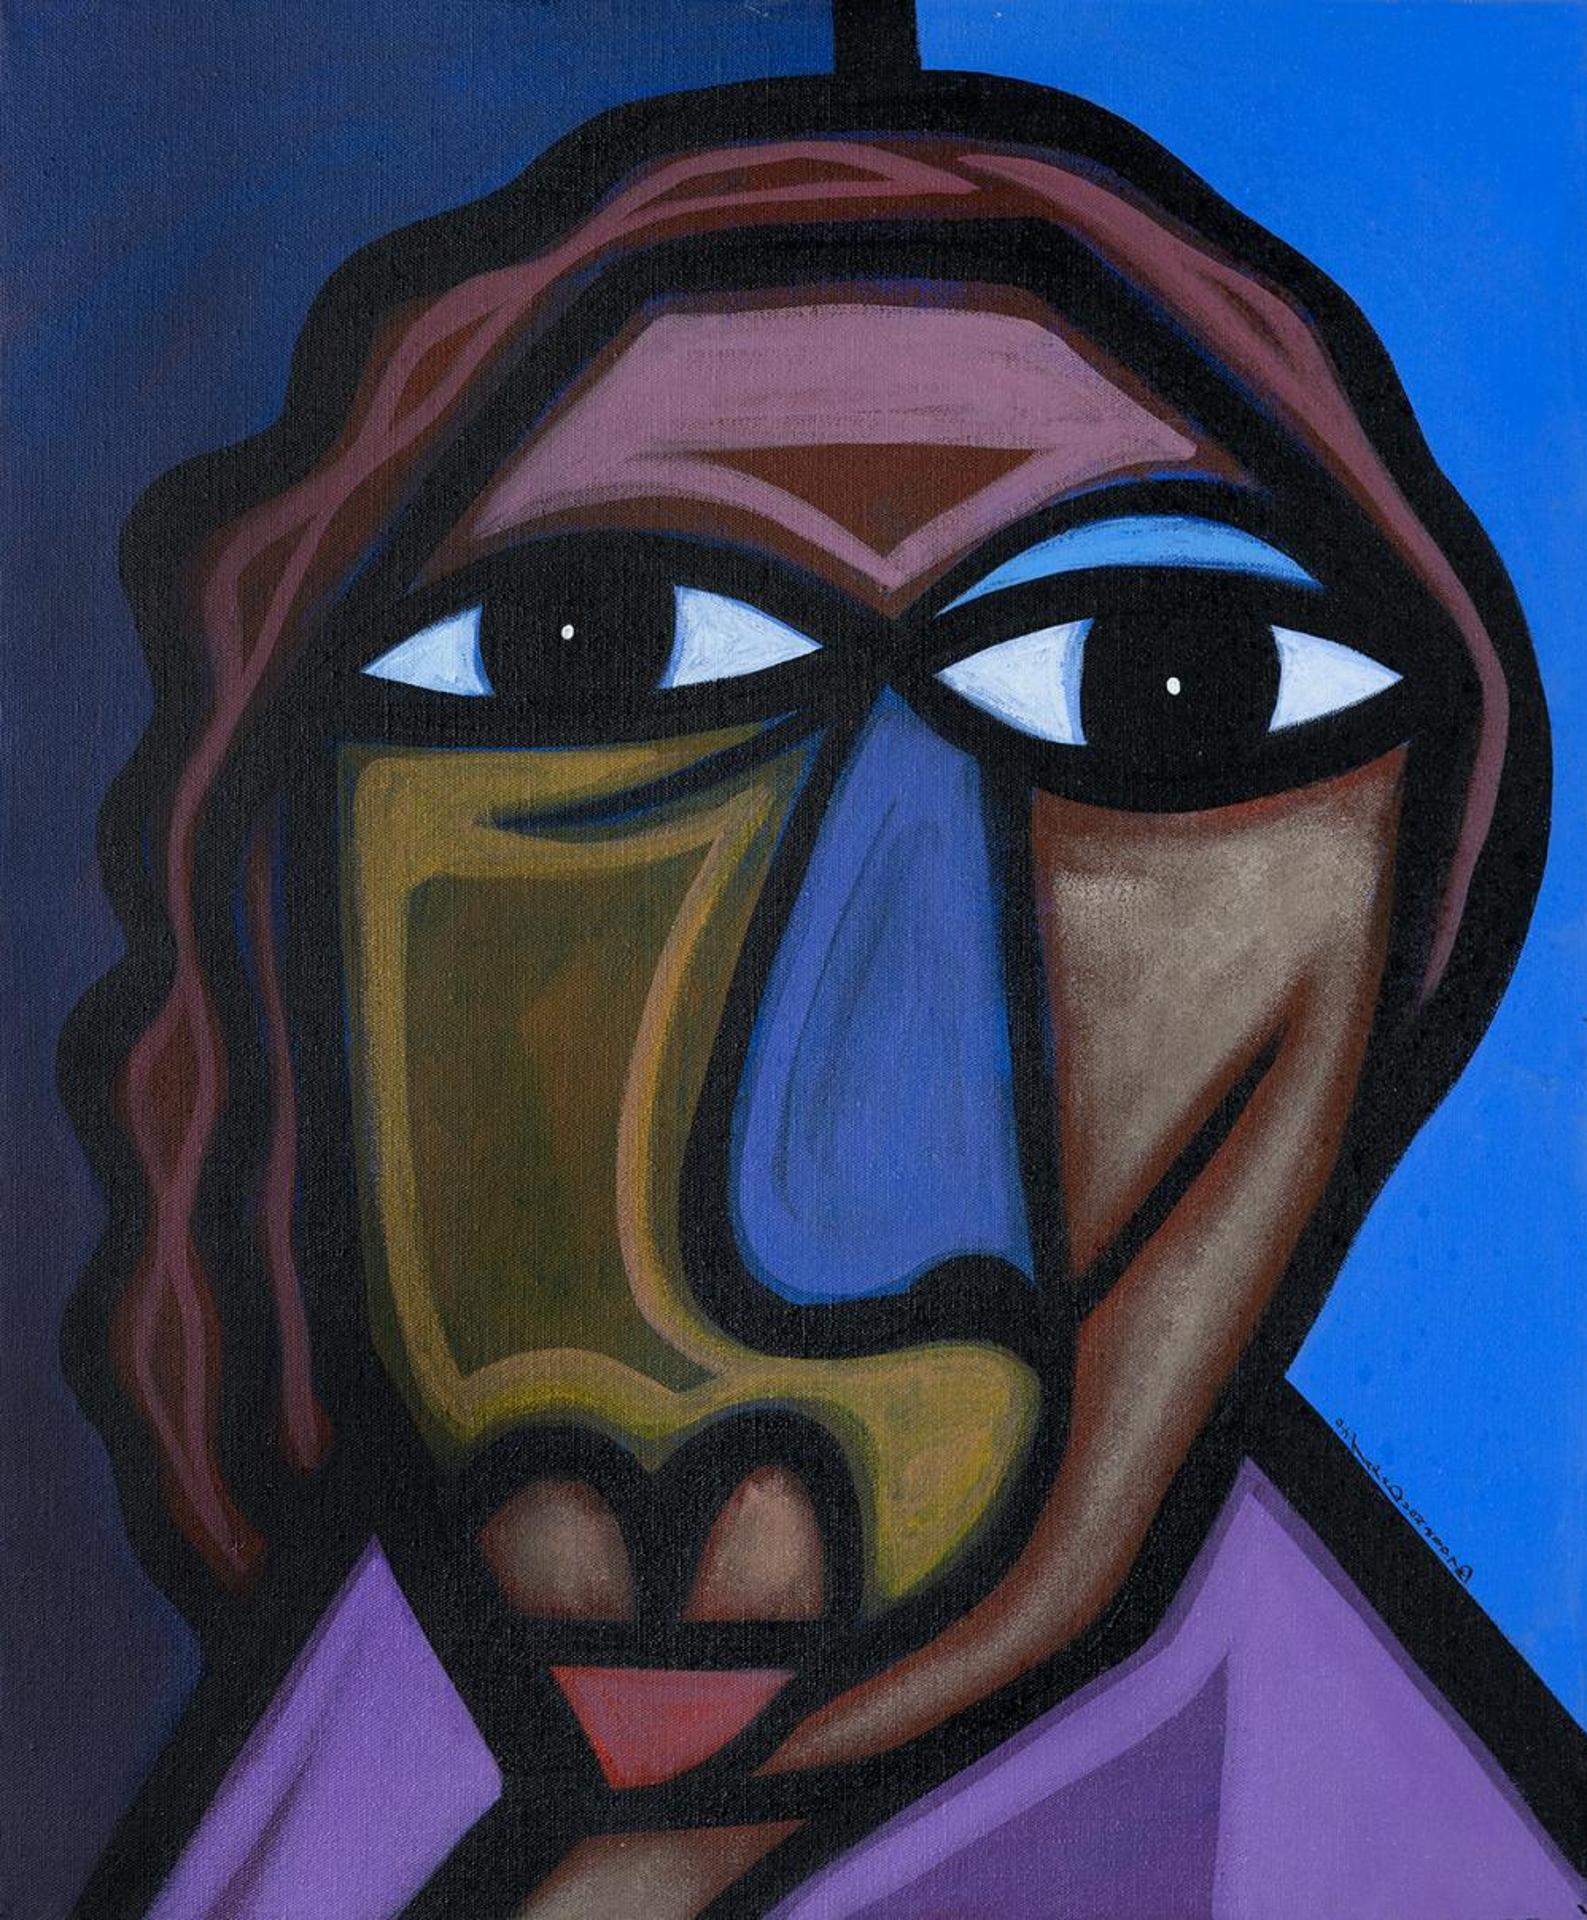 D.J. Tapaquon (1977) - Untitled - Face